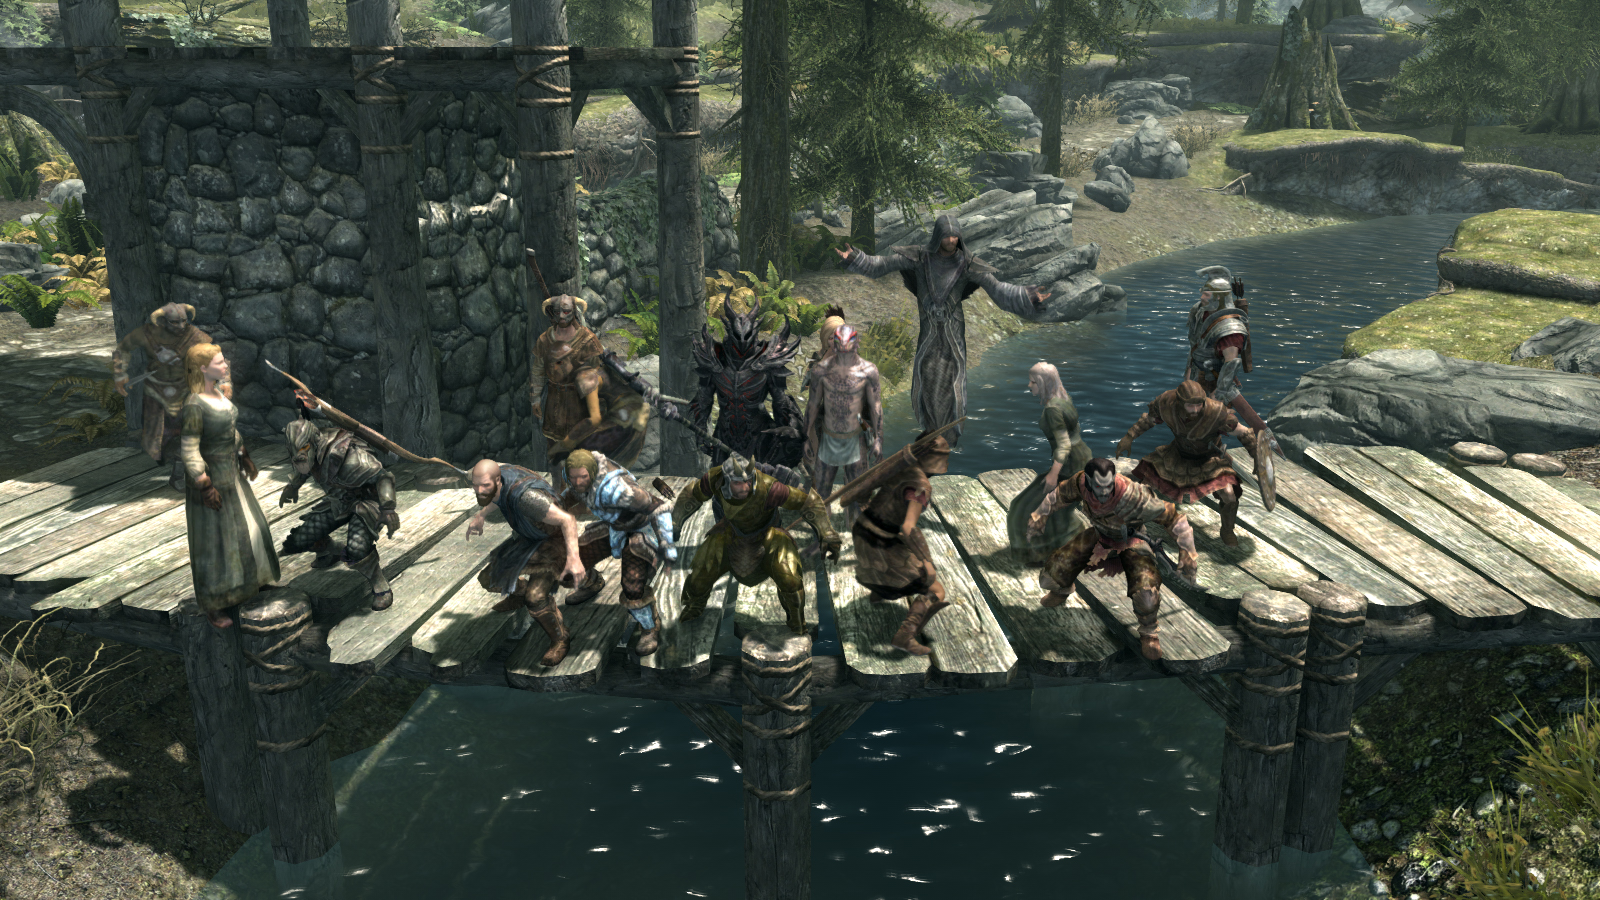 Skyrim mods - A small clan of Dragonborn gather in co-op in Skyrim Together Reborn.